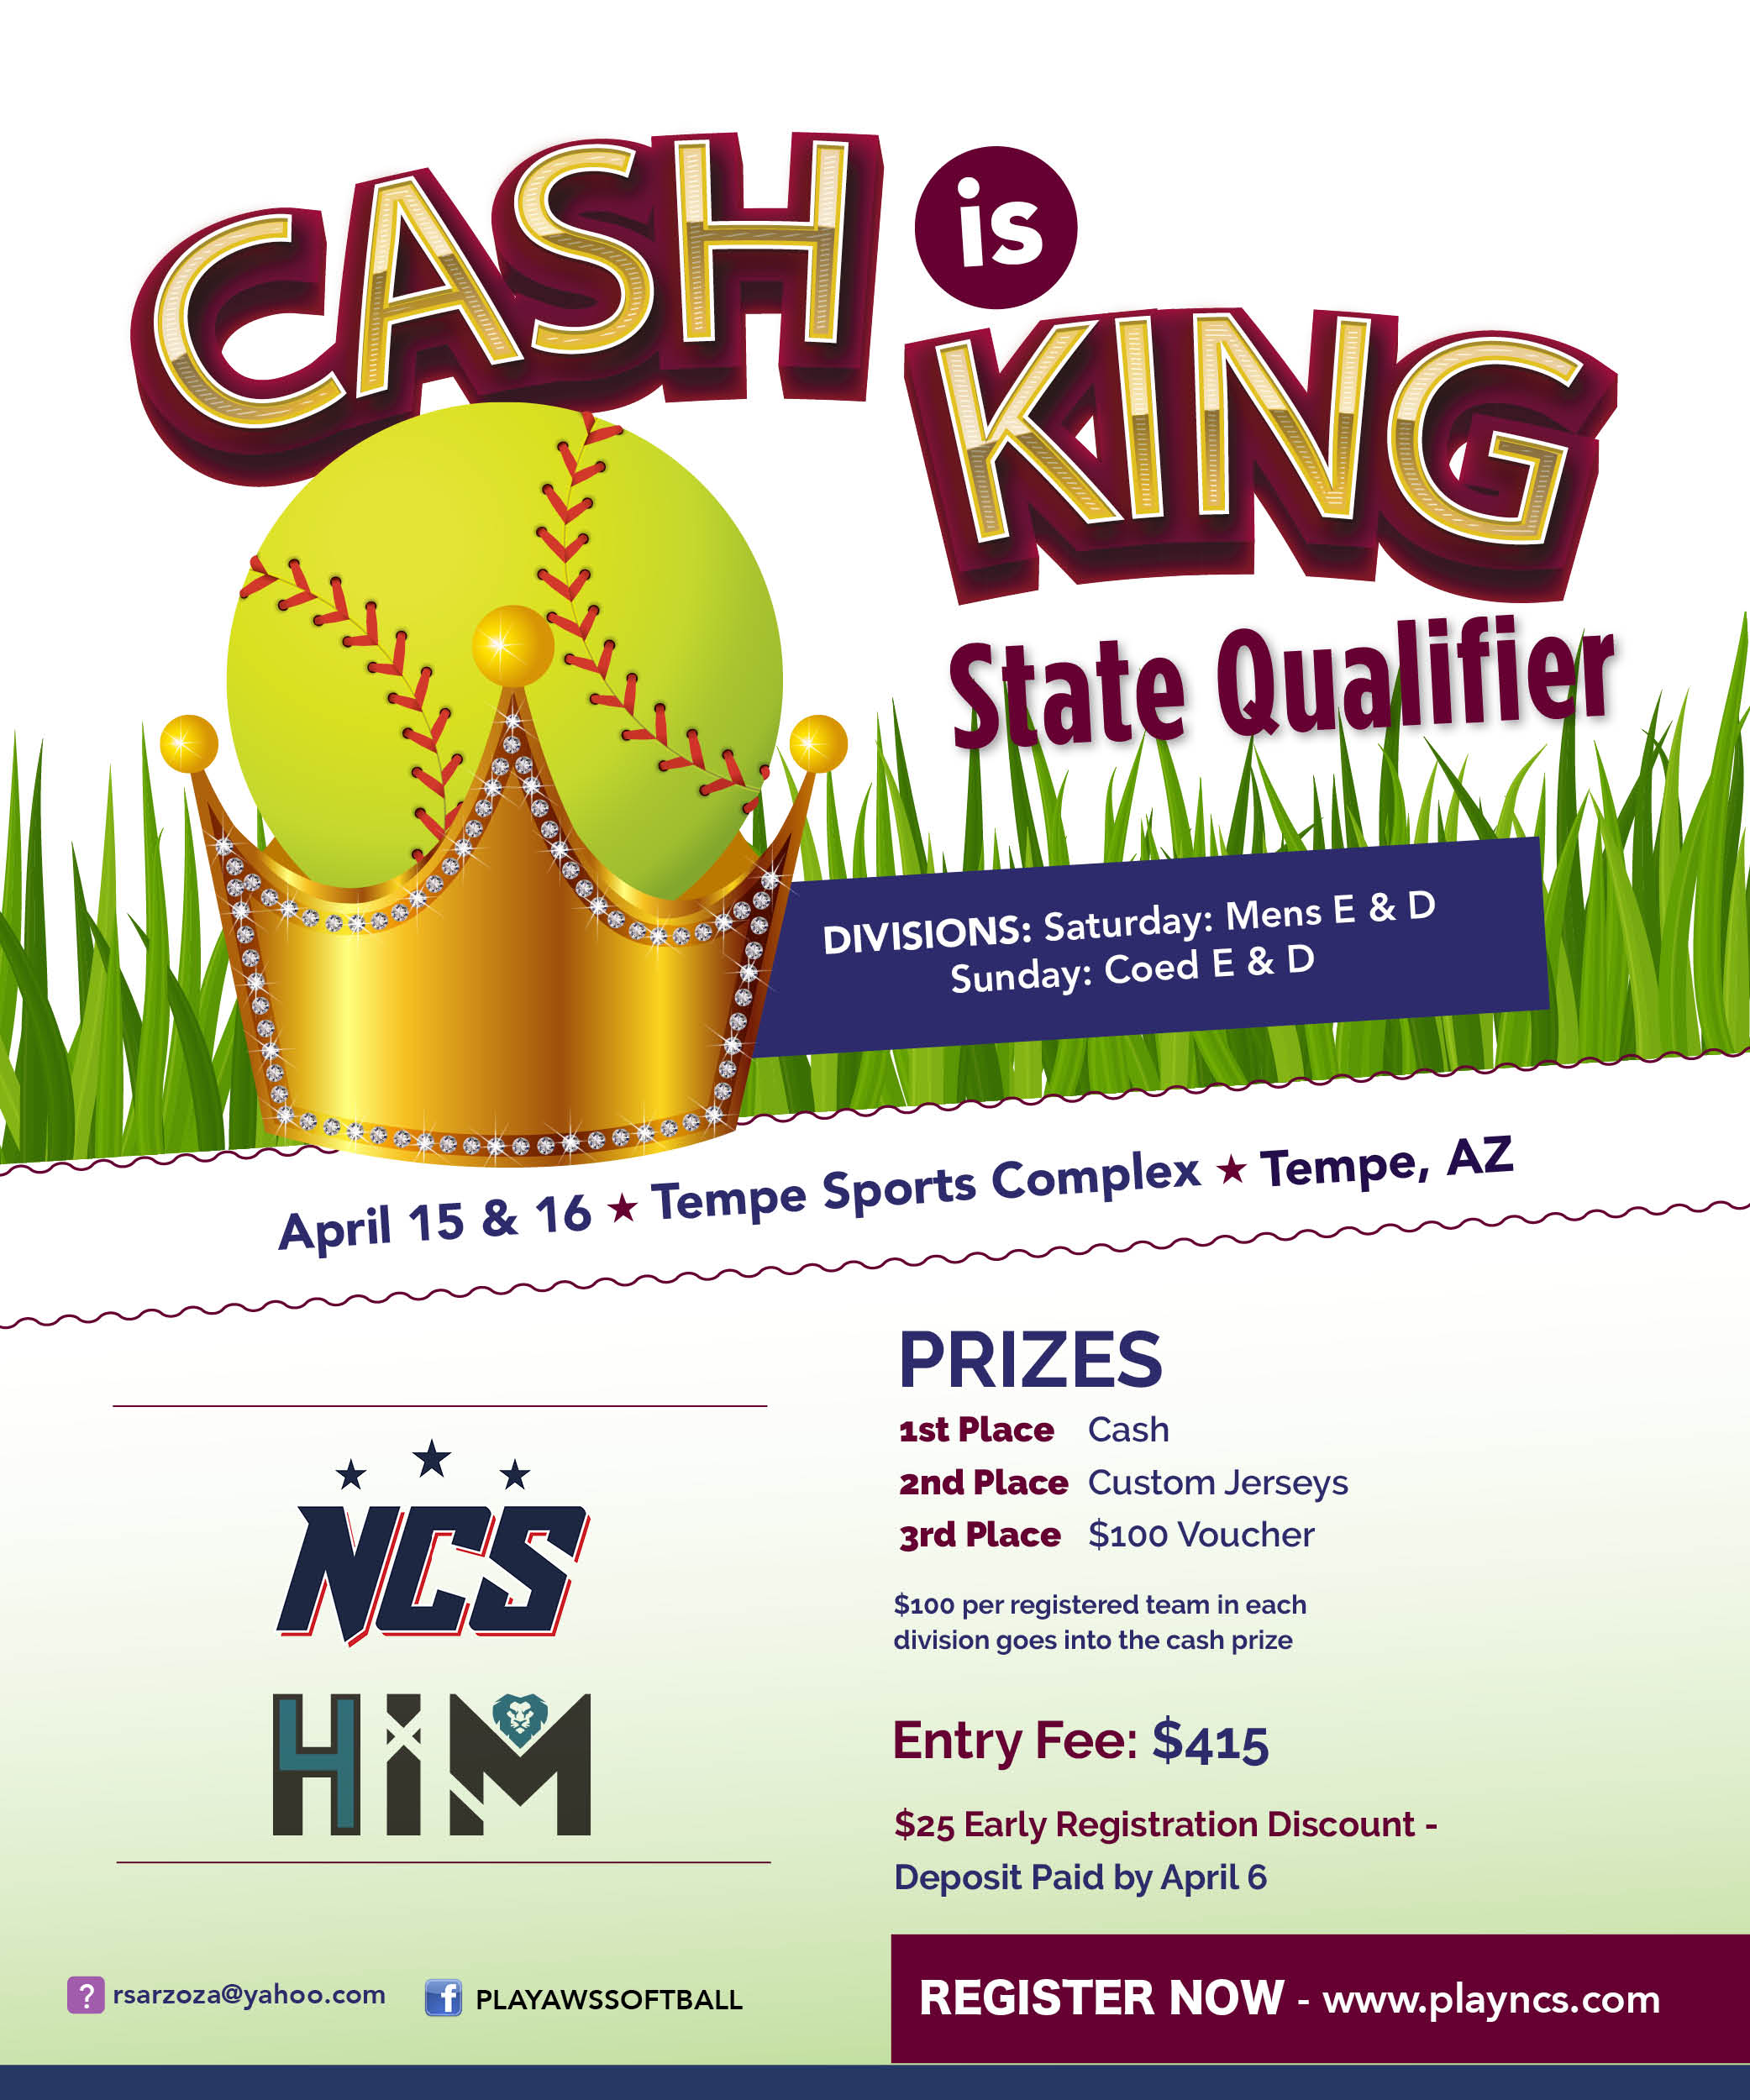 CASH IS KING - STATE QUALIFIER (E, D) Logo